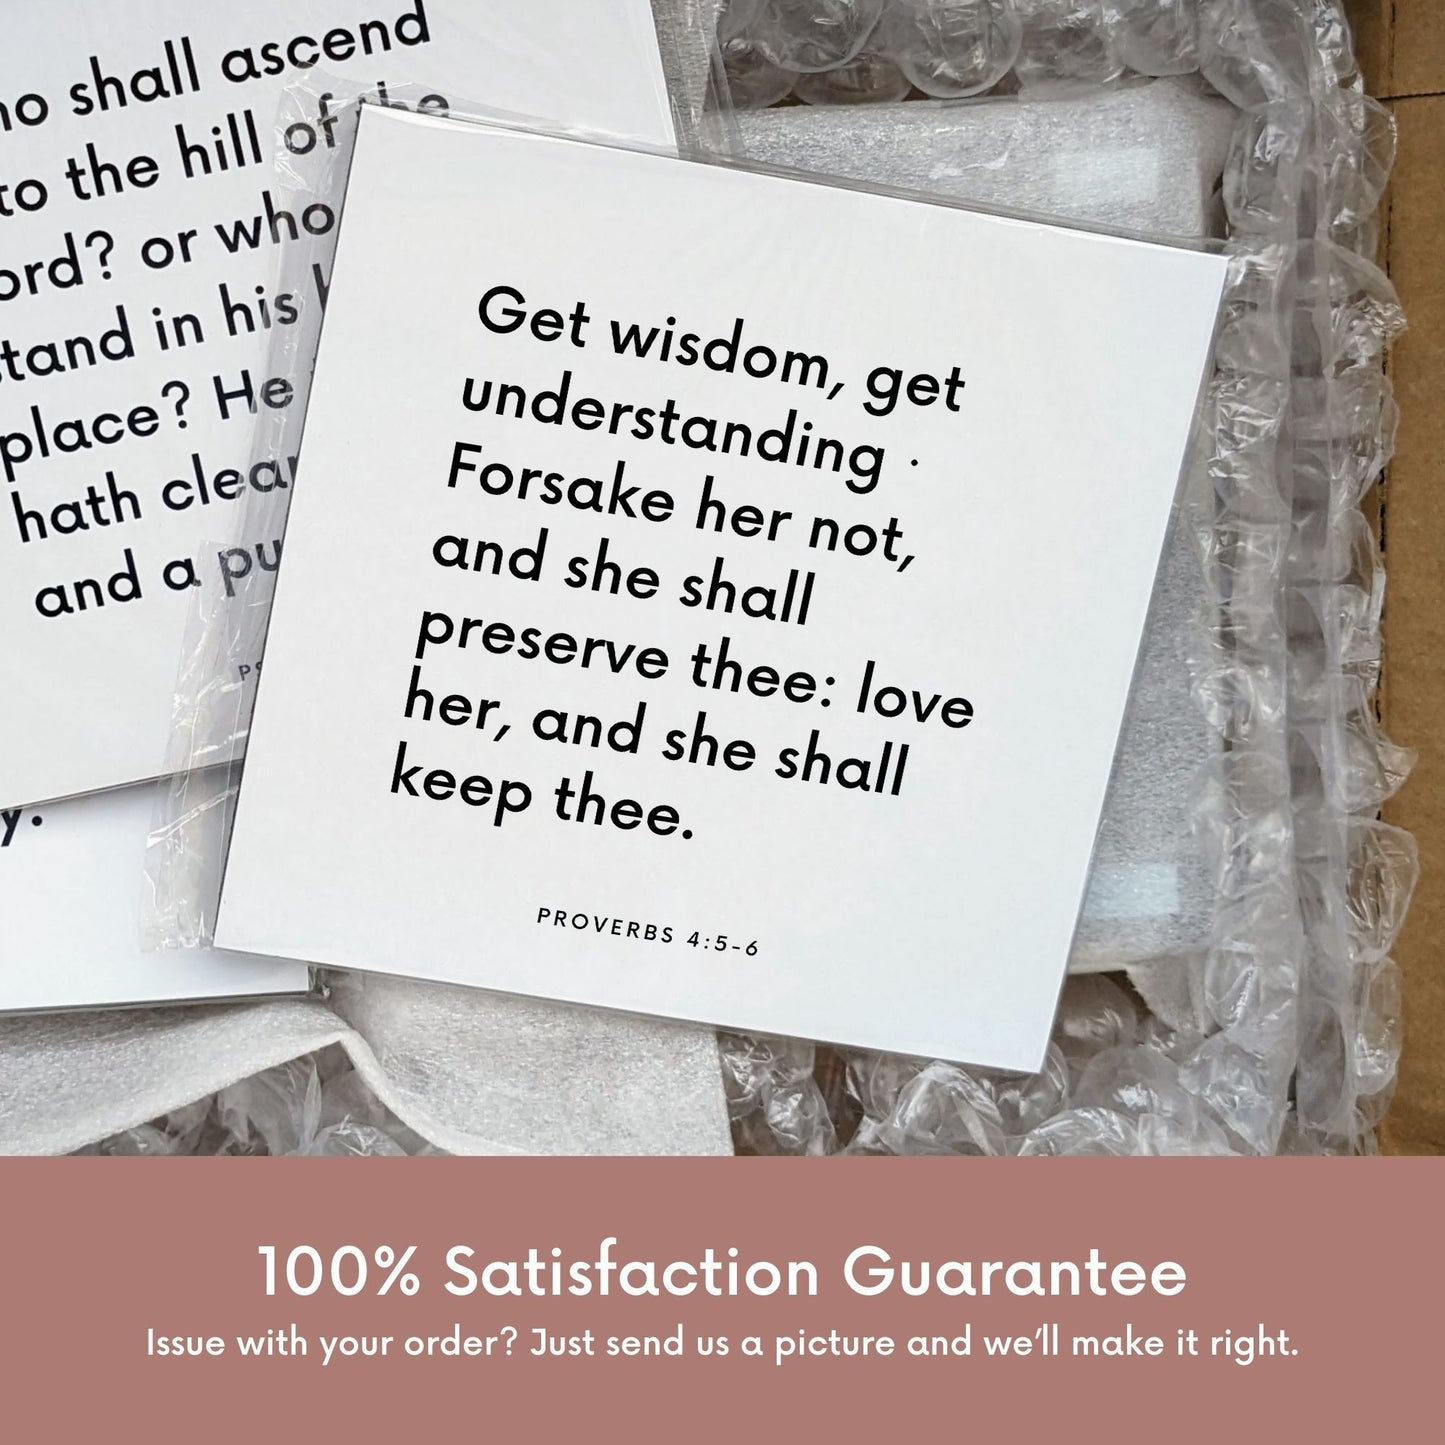 Shipping materials for scripture tile of Proverbs 4:5-6 - "Get wisdom, forsake her not, and she shall preserve thee"